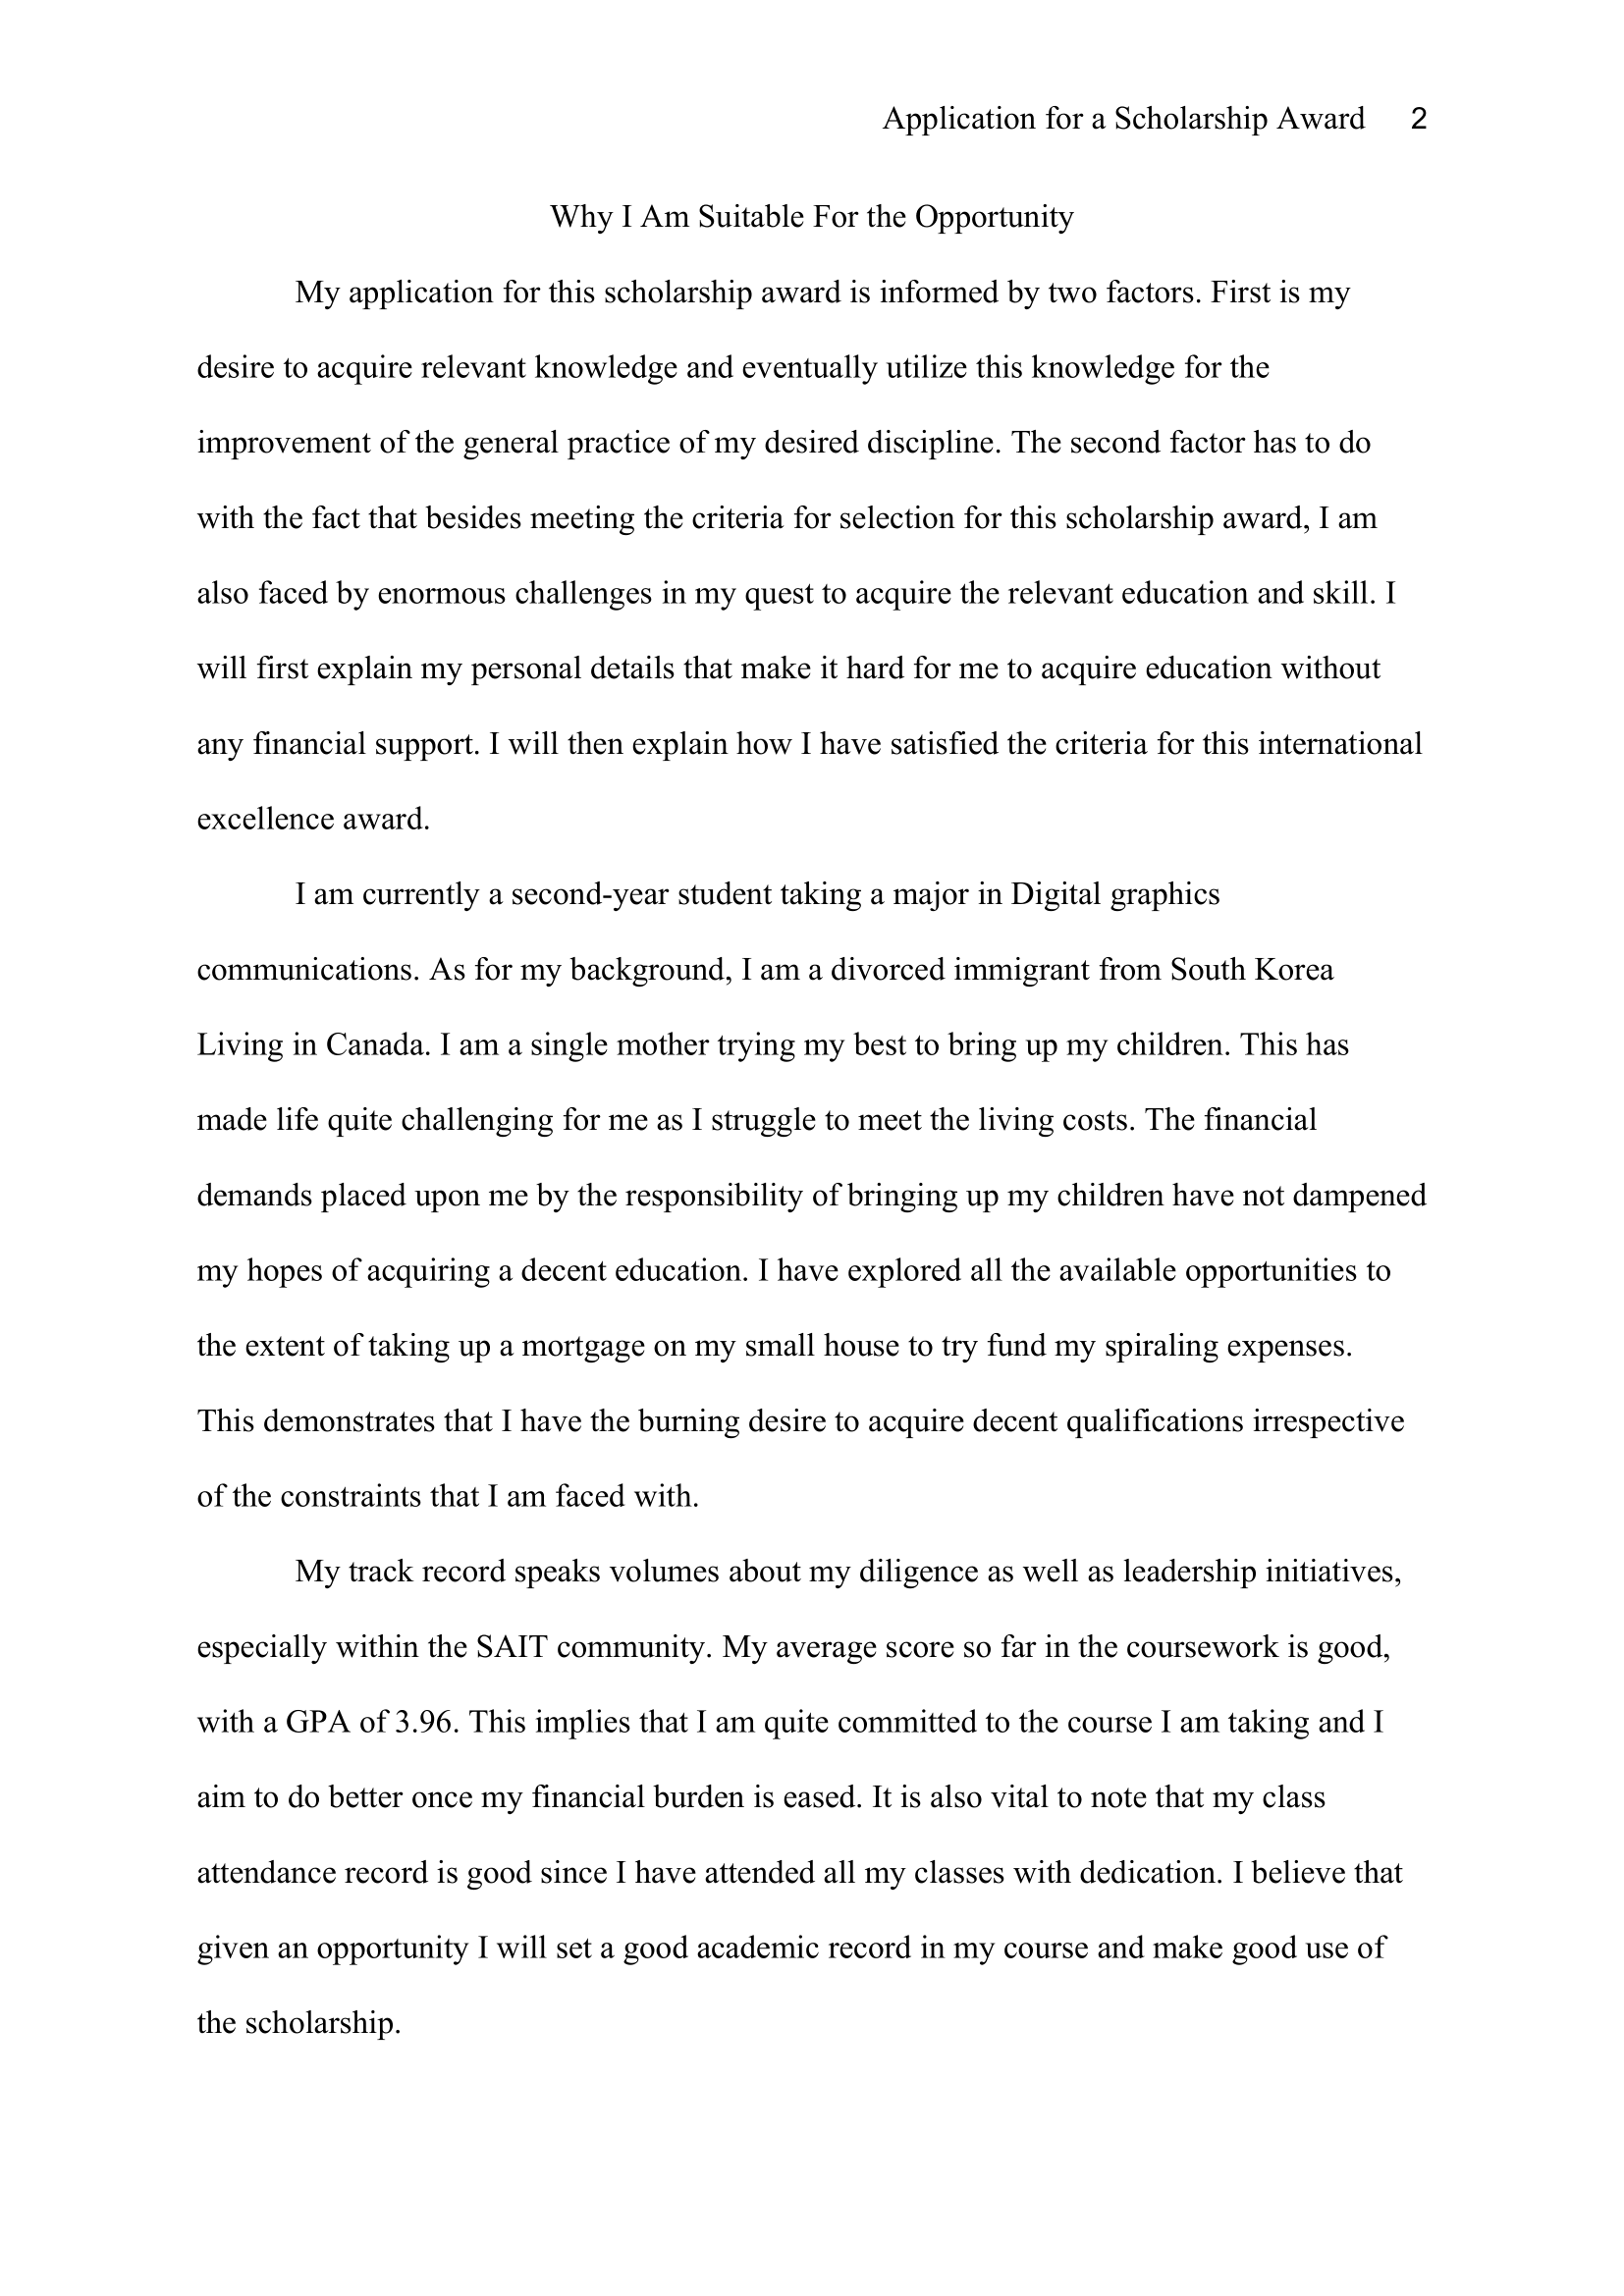 essay on why research